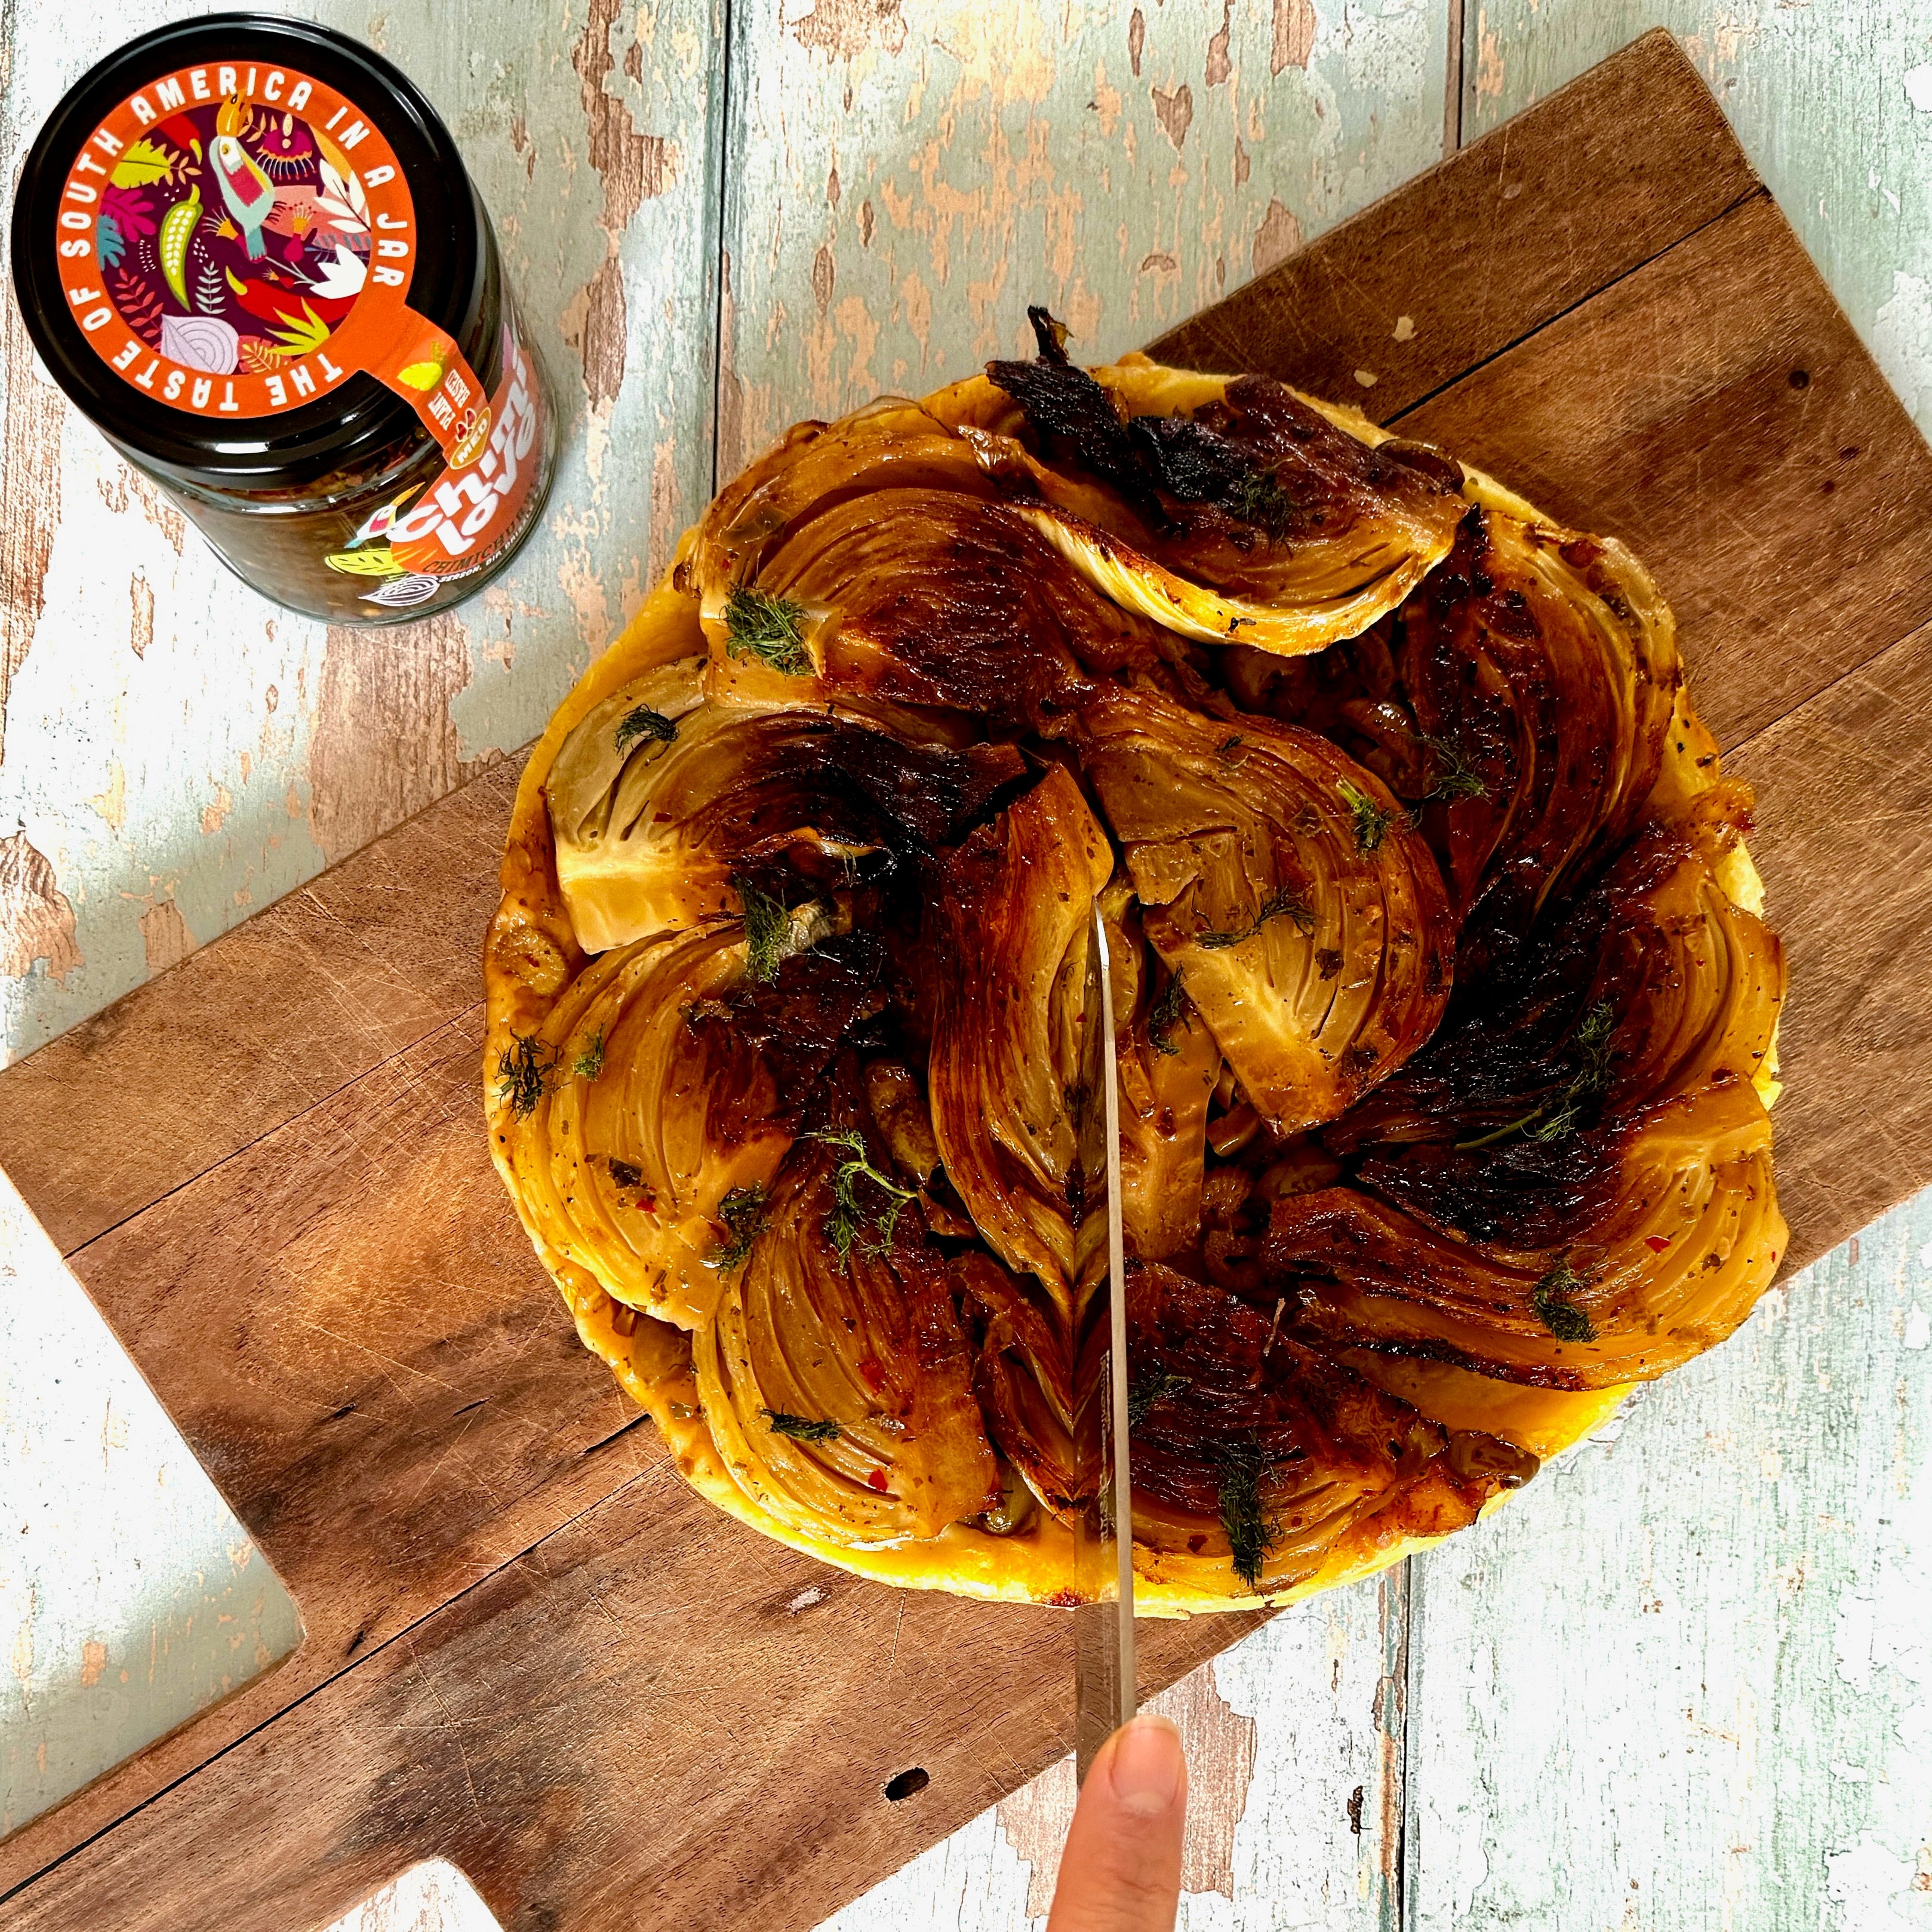 Caramelised fennel tart with grapes, olives and chimichurri